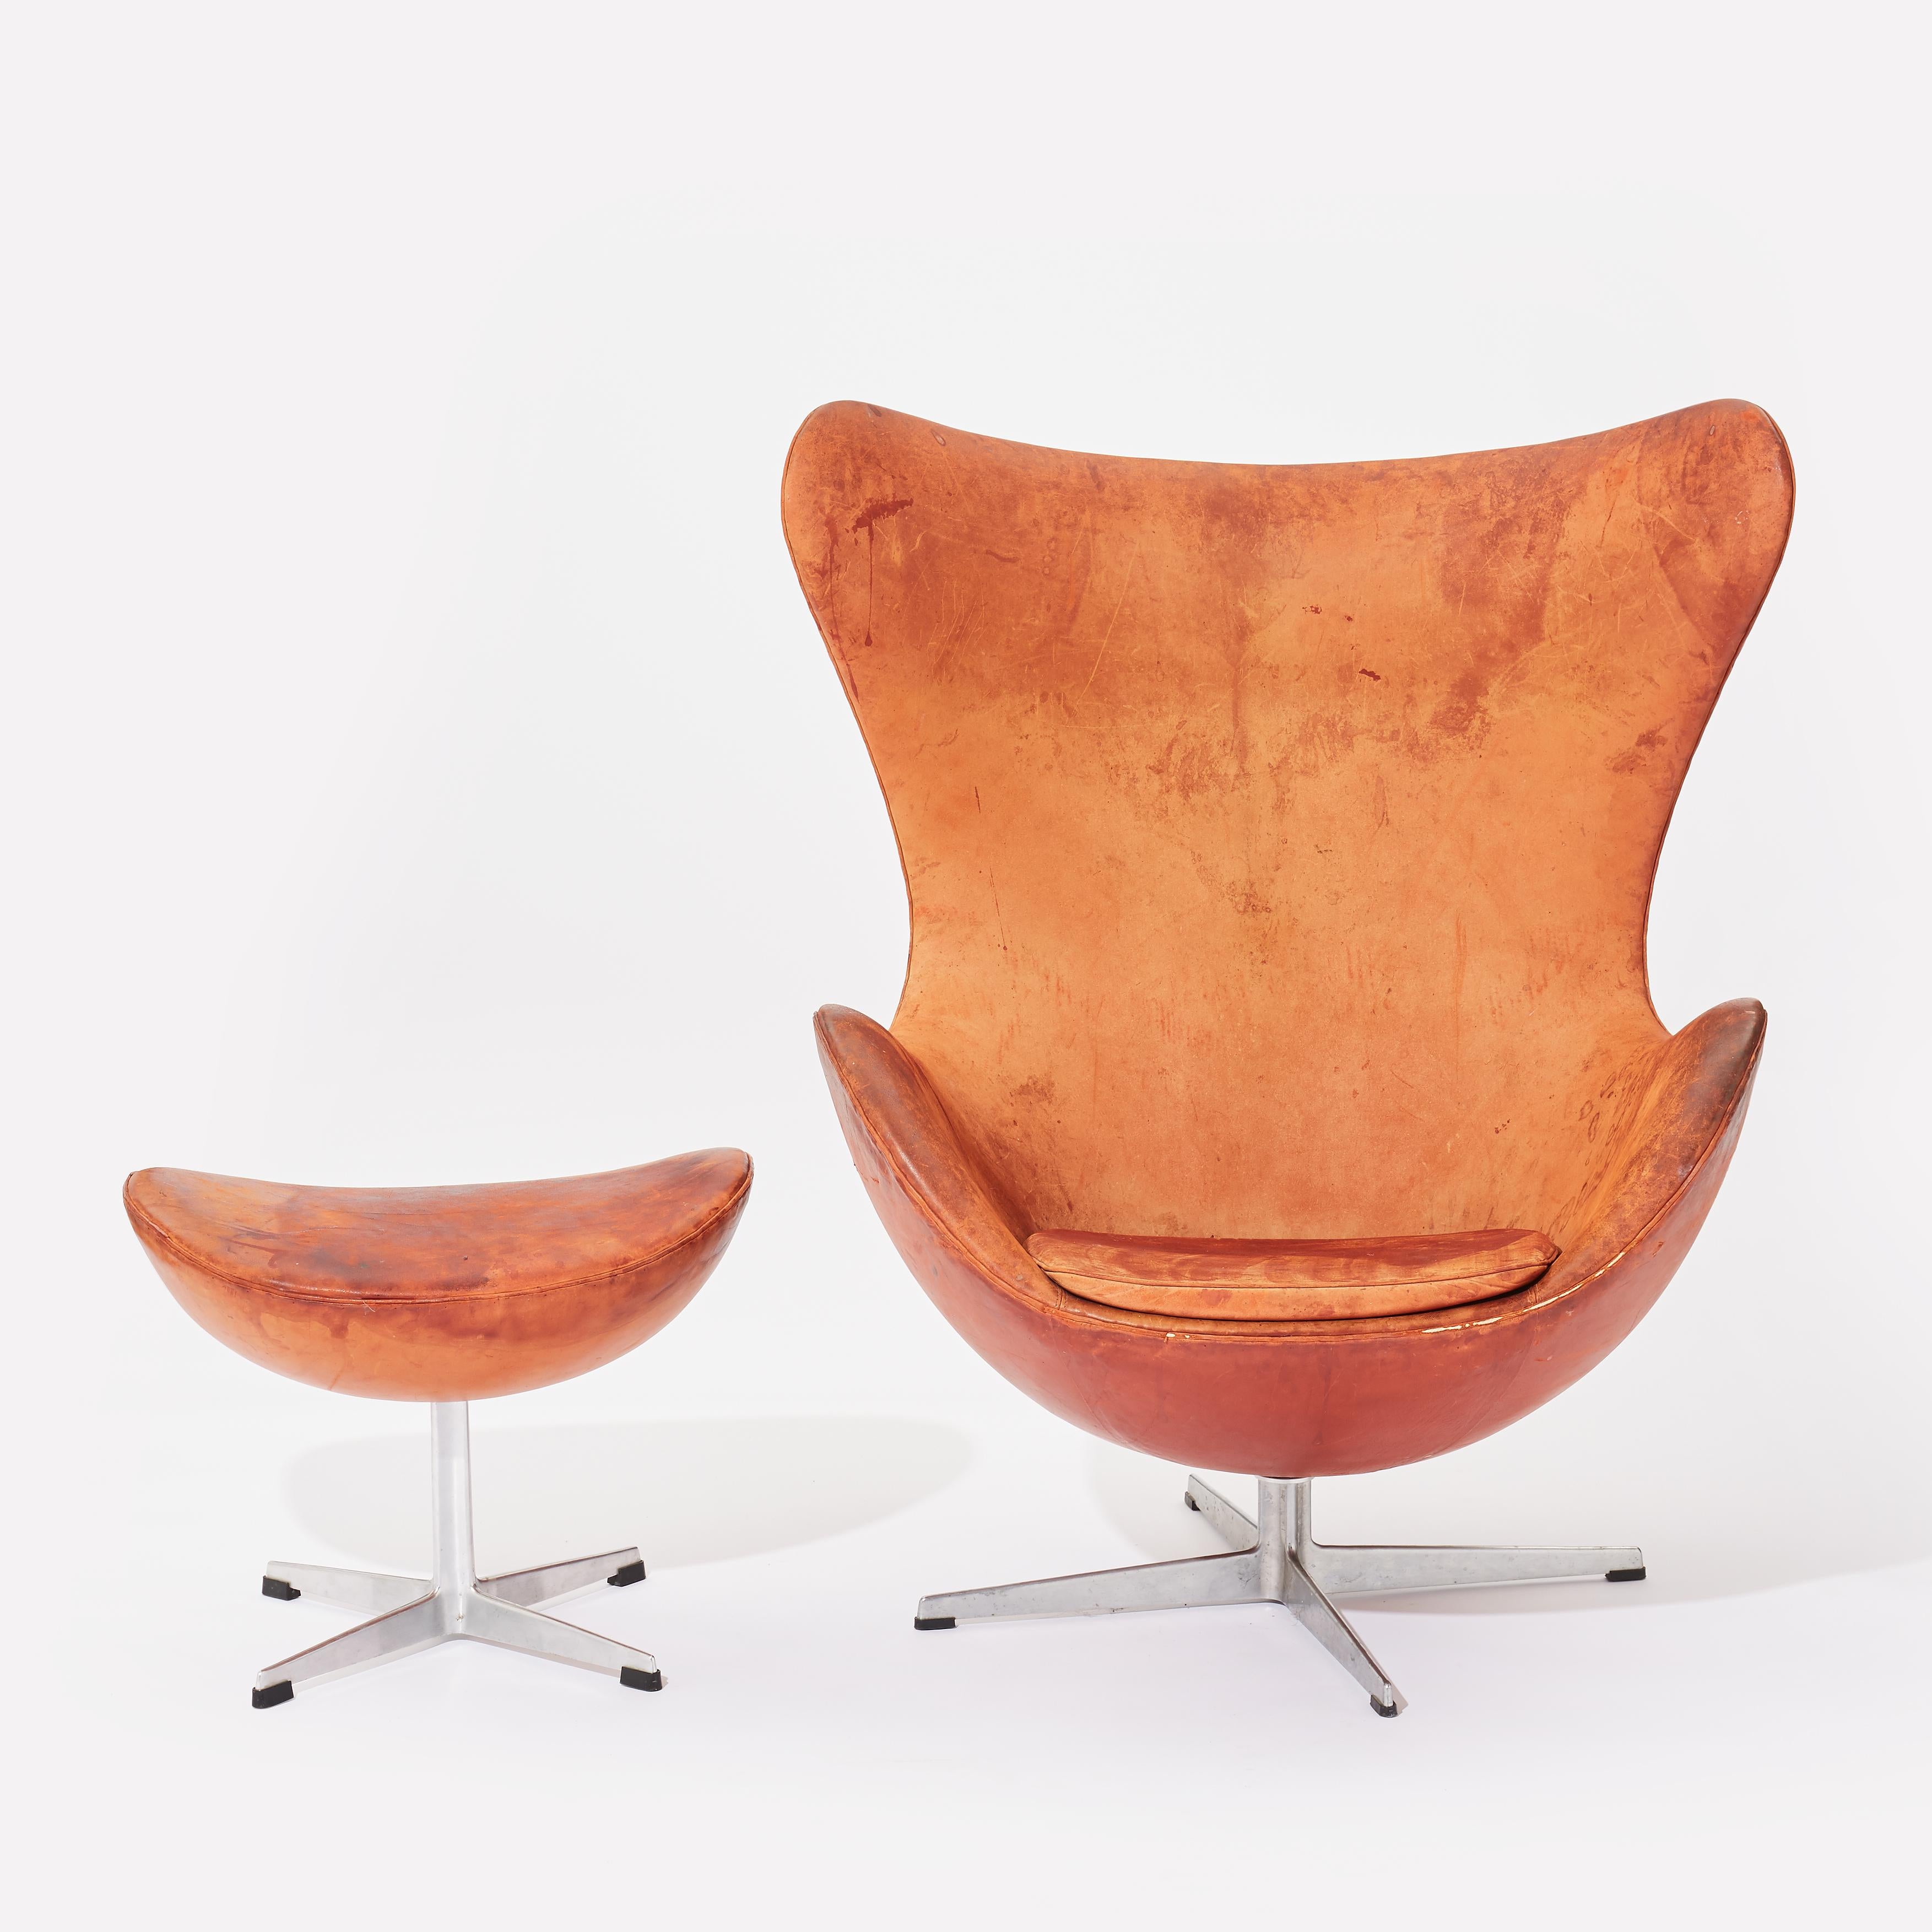 Early easy Egg chair model 3316 and ottoman designed by Arne Jacobsen and produced by Fritz Hansen in Denmark in 1958. Vintage original upholstery with patinated light brown leather. Signed by Fritz Hansen.